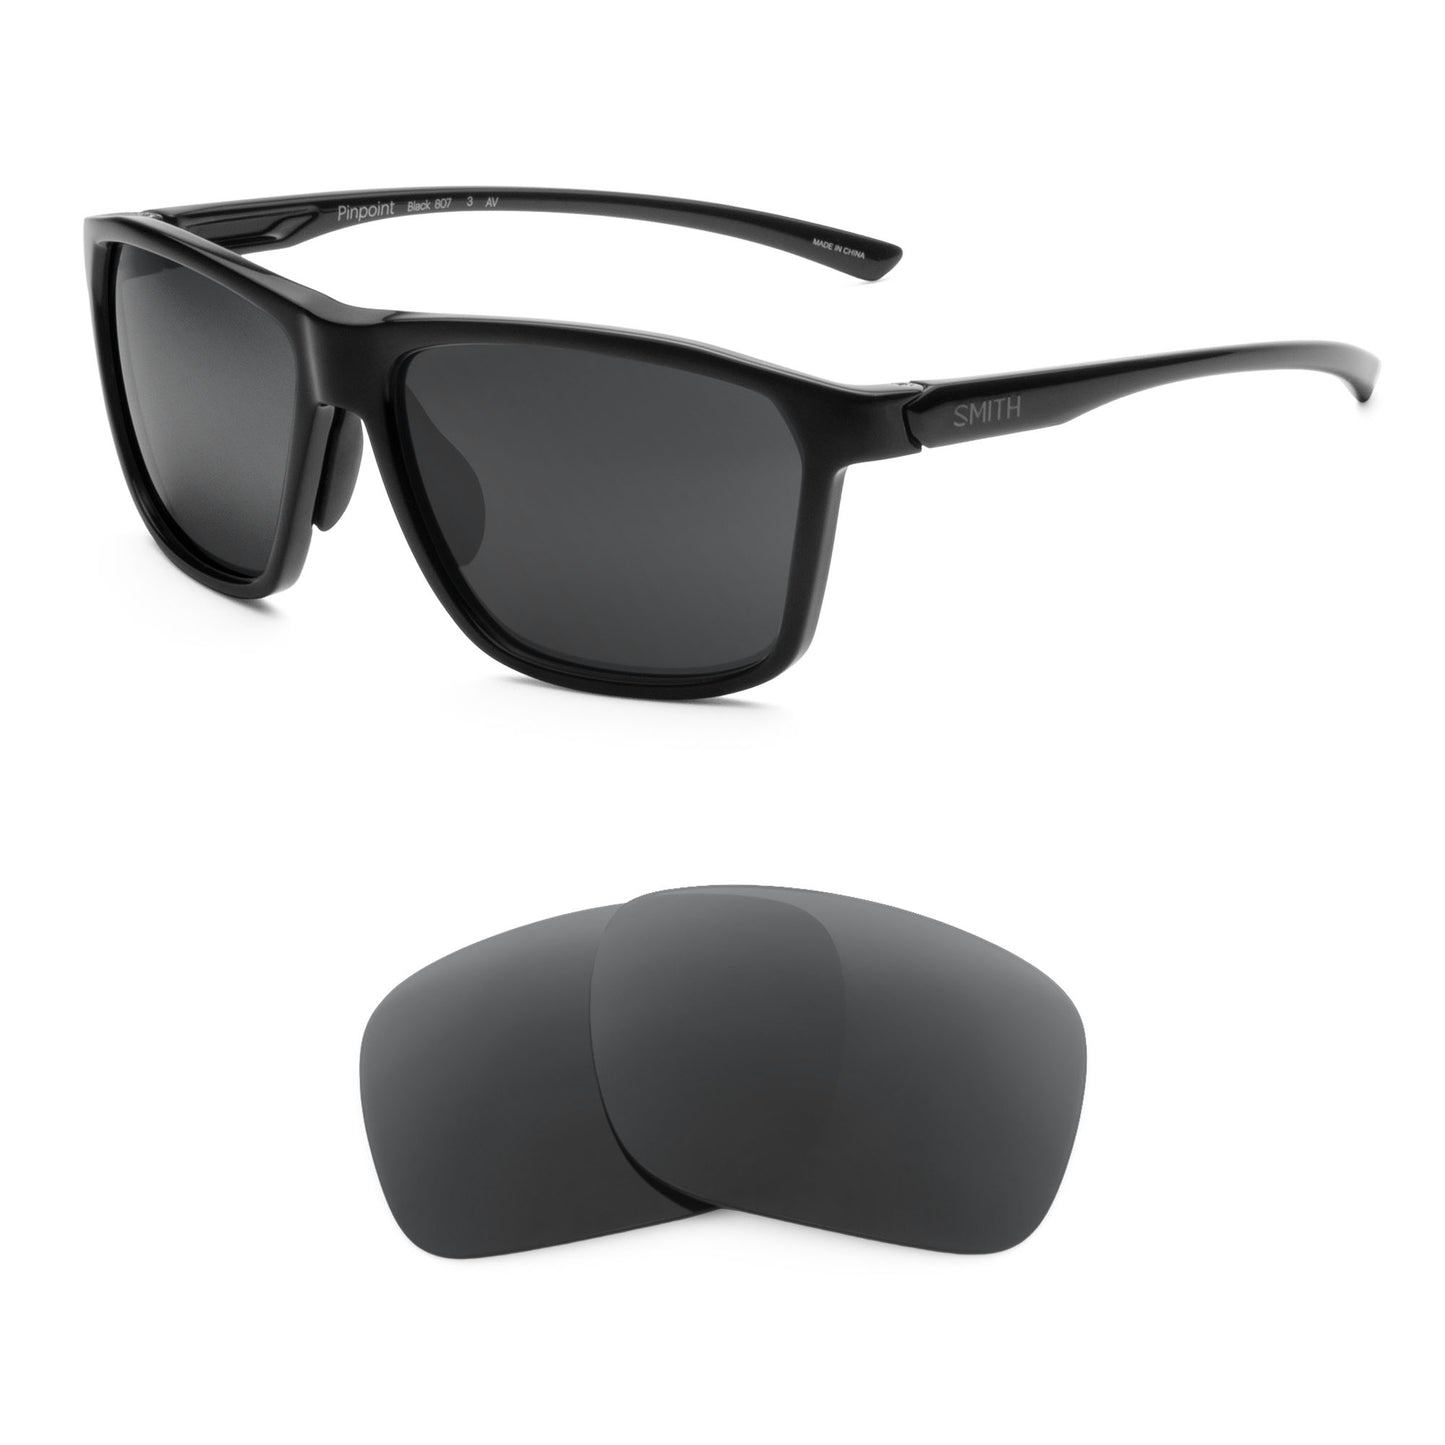 Smith Pinpoint sunglasses with replacement lenses